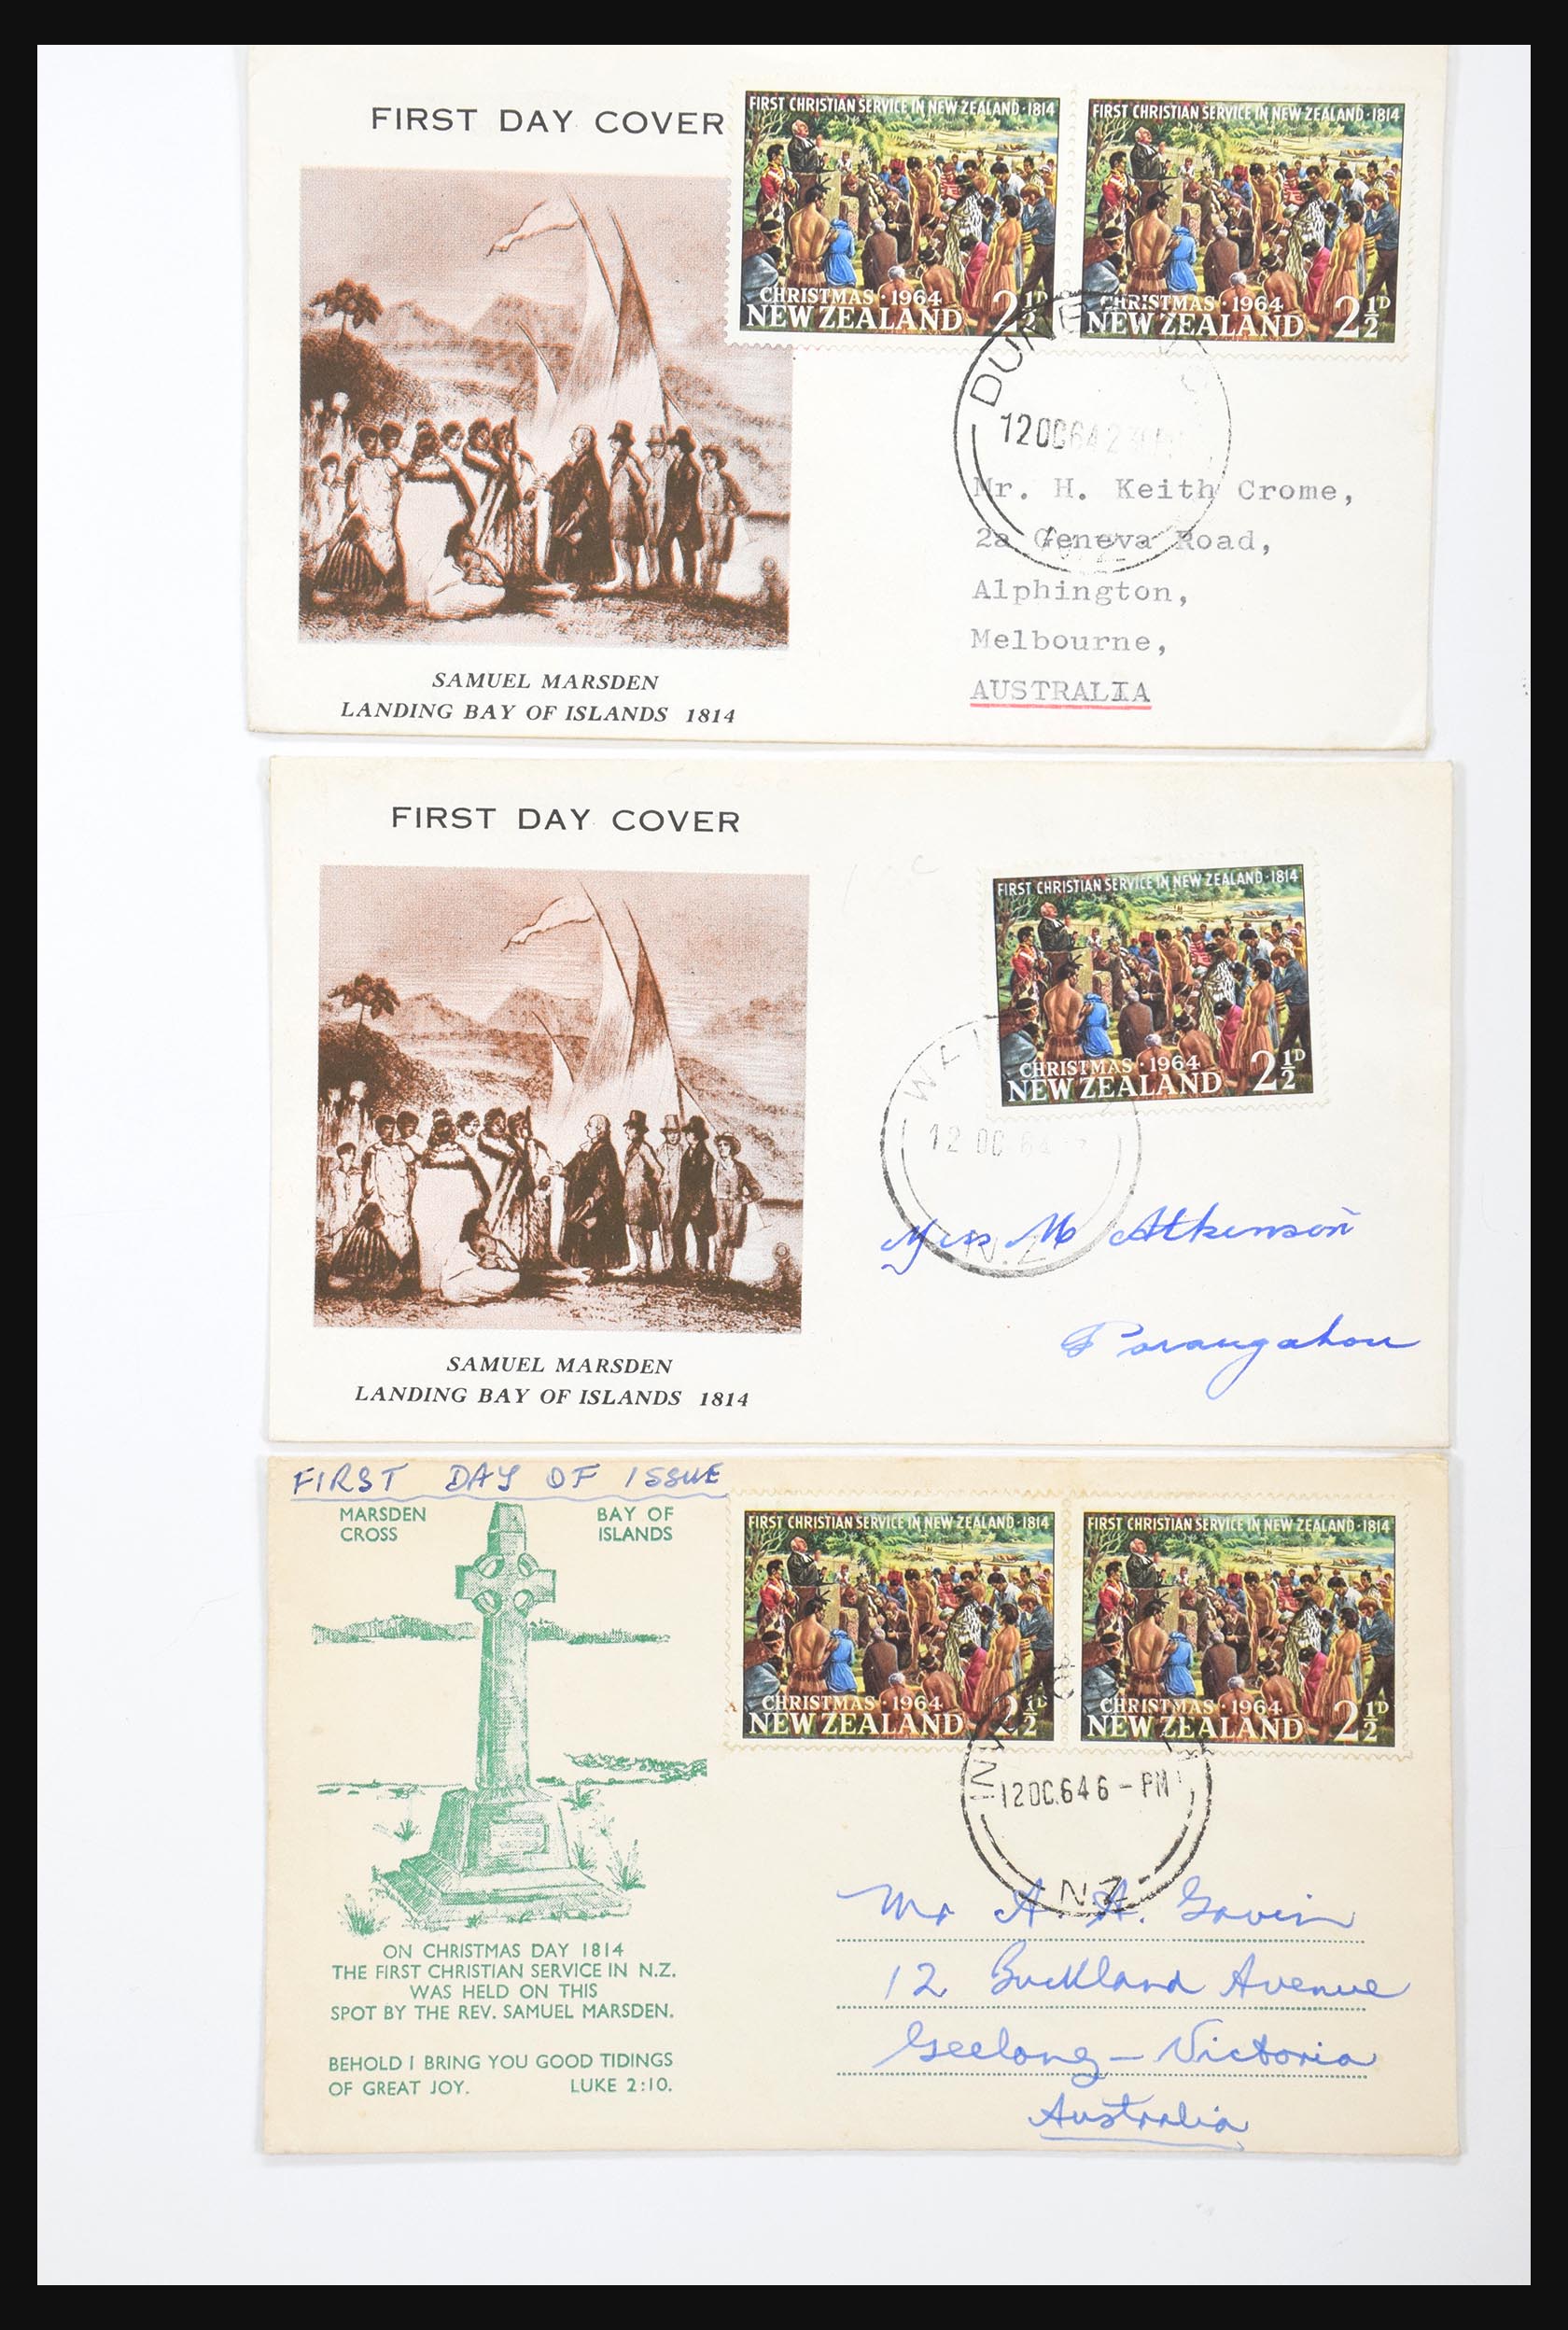 30821 067 - 30821 New Zealand FDC's 1960-1971.